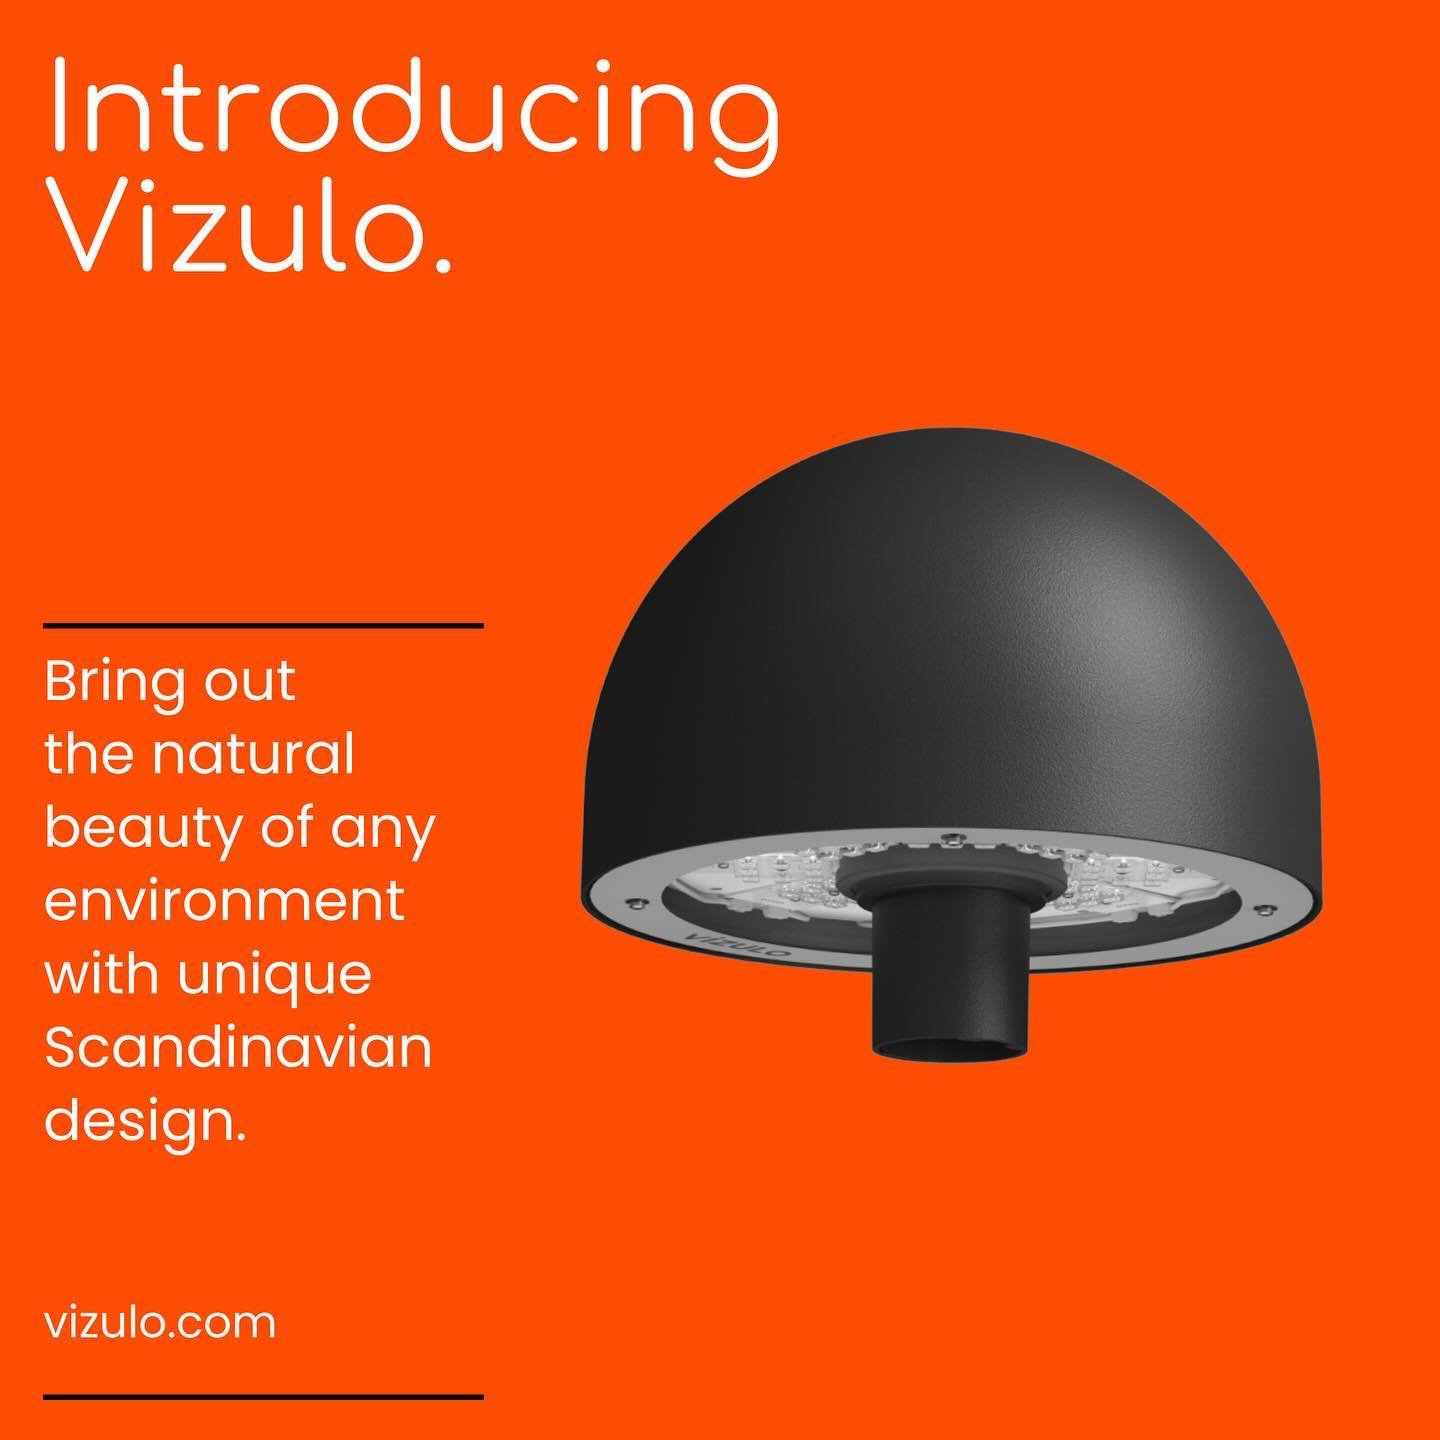 We our proud to introduce Vizulo - beautiful lighting design from Latvia! Follow us @speclines or DM for more info on how to specify these gorgeous lighting solutions. #architecturallightingdesign #architecturallighting